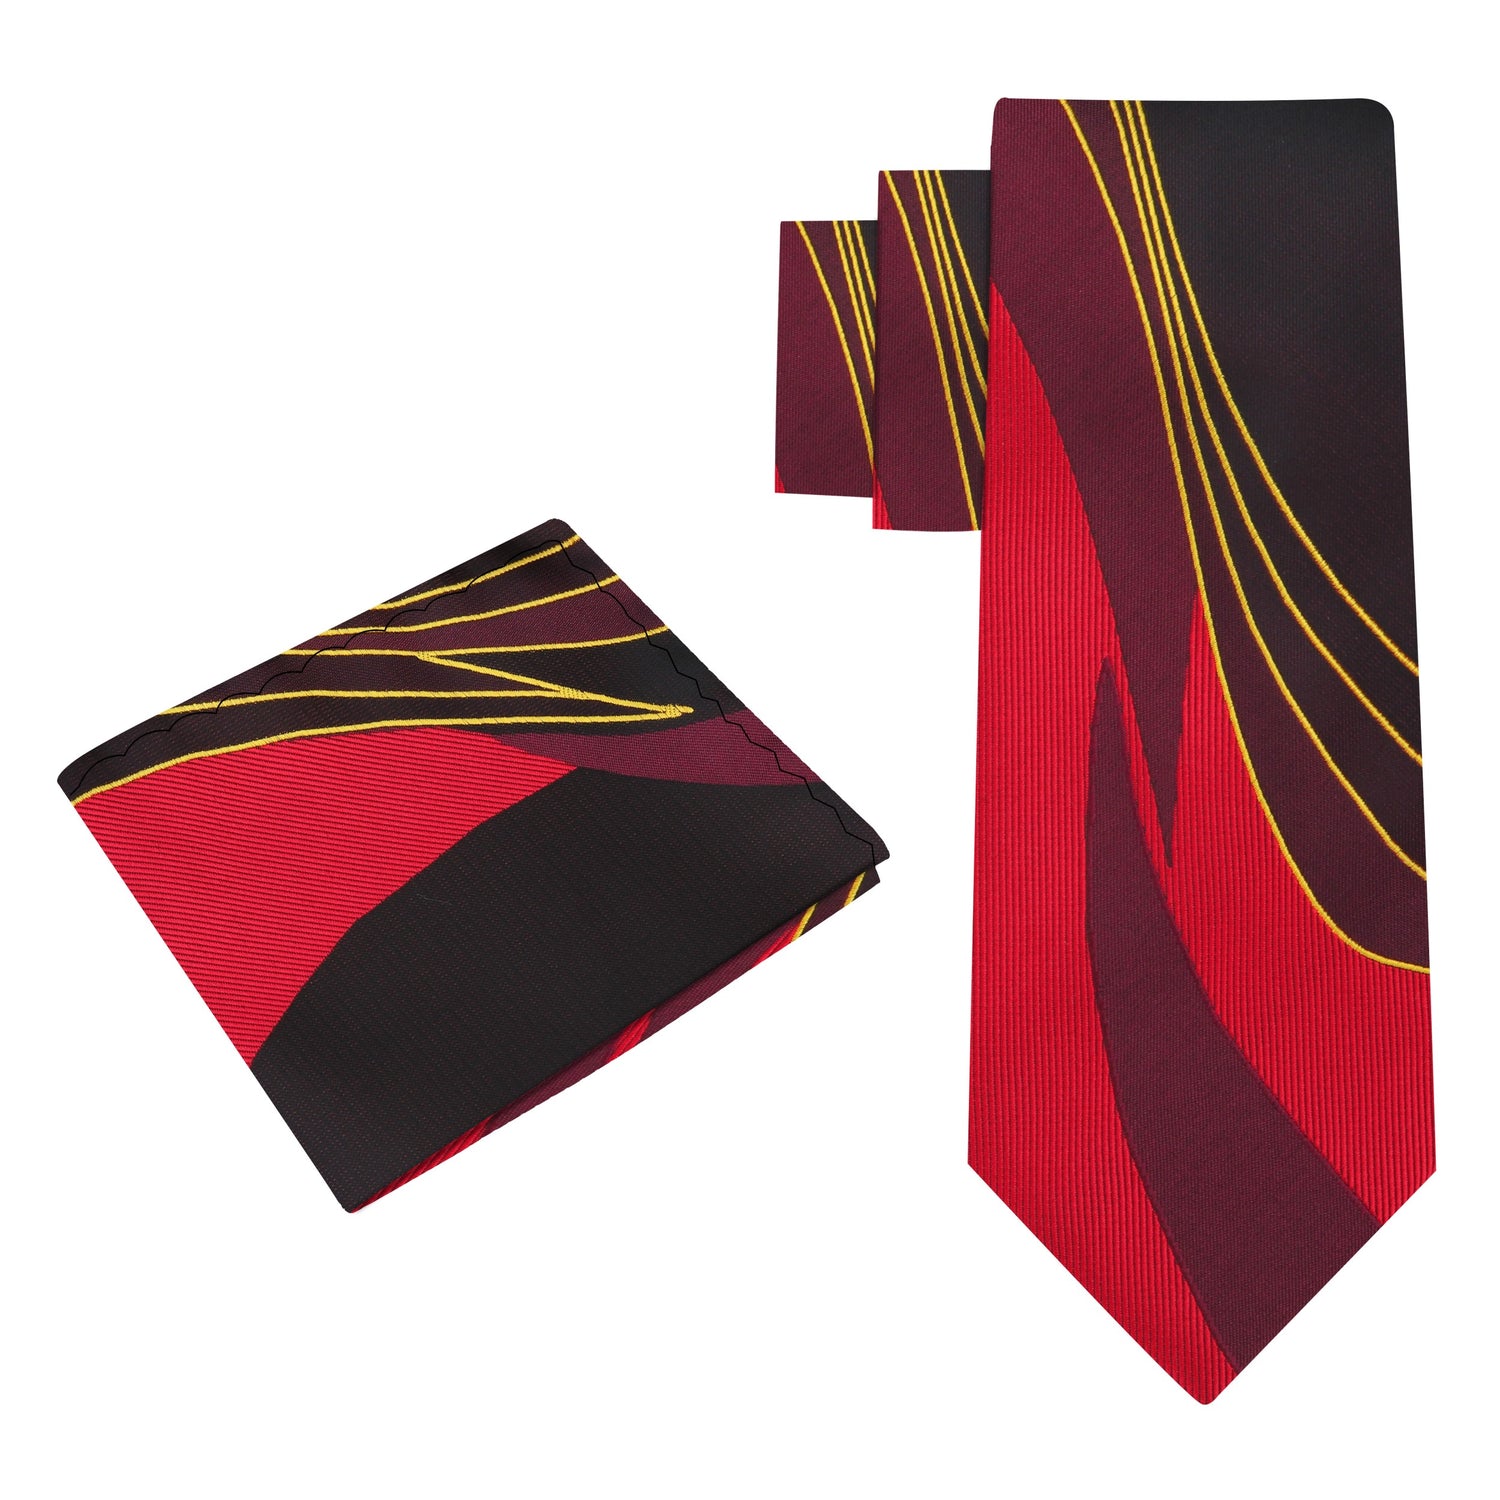 Alt View: Shades of Red and Yellow Abstract Tie and Square